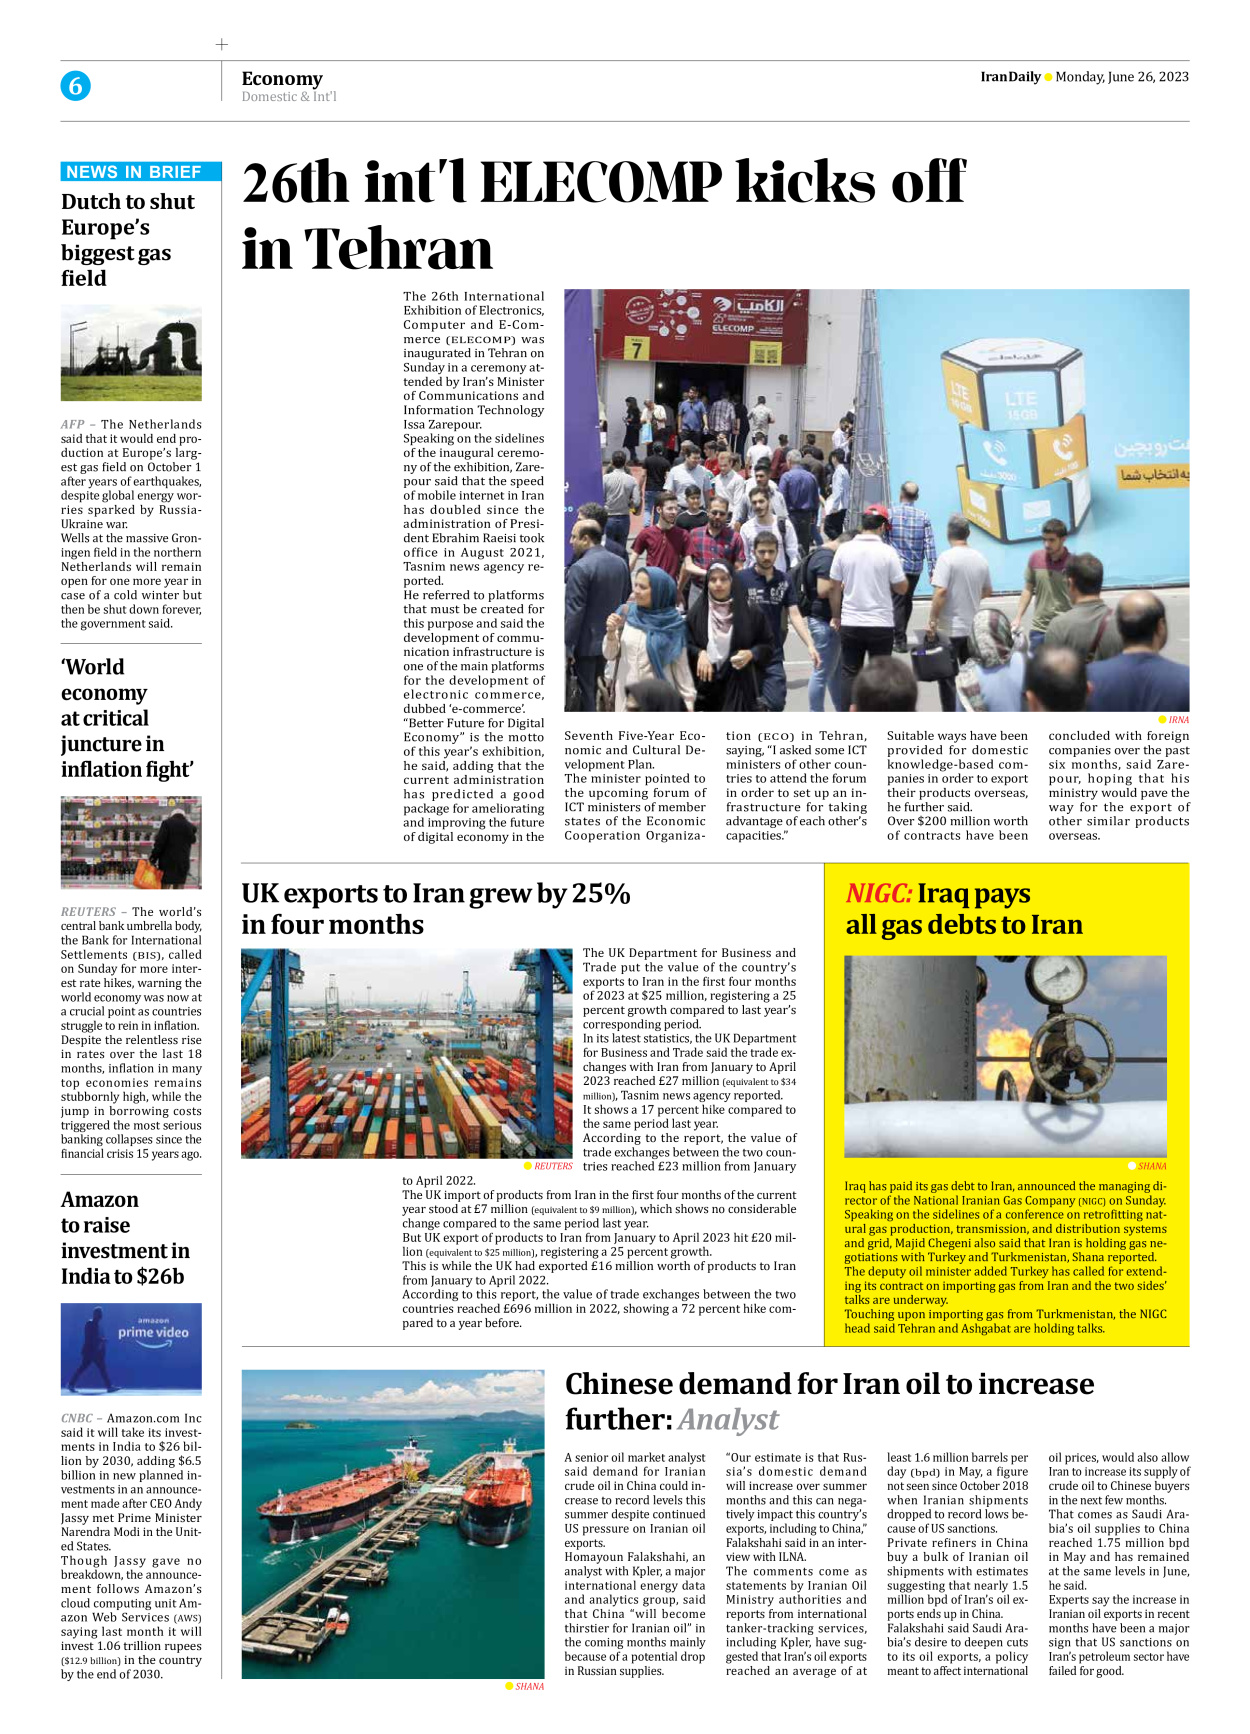 Iran Daily - Number Seven Thousand Three Hundred and Twenty Four - 26 June 2023 - Page 6